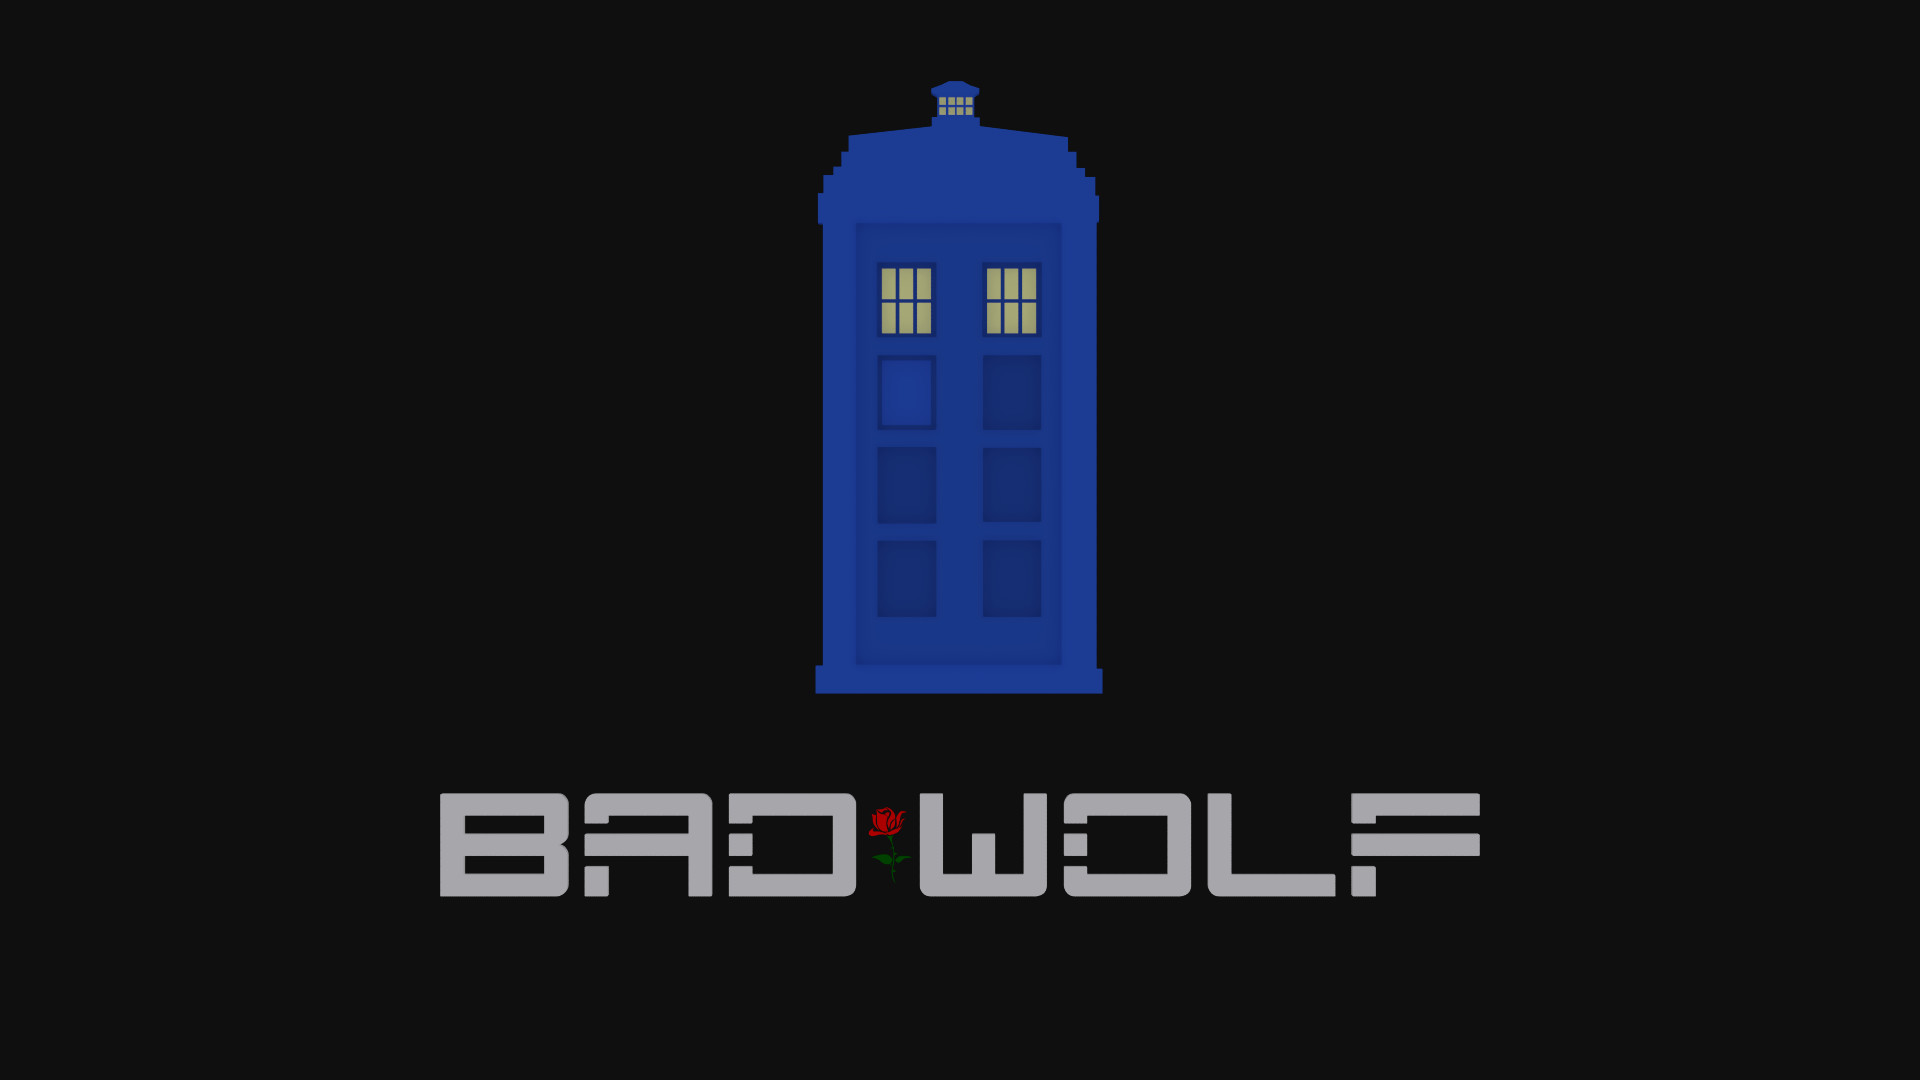 Doctor Who Rose Bad Wolf wallpaper | Cool Desktop Wallpaper | Pinterest |  Bad wolf, Tardis and Wallpaper